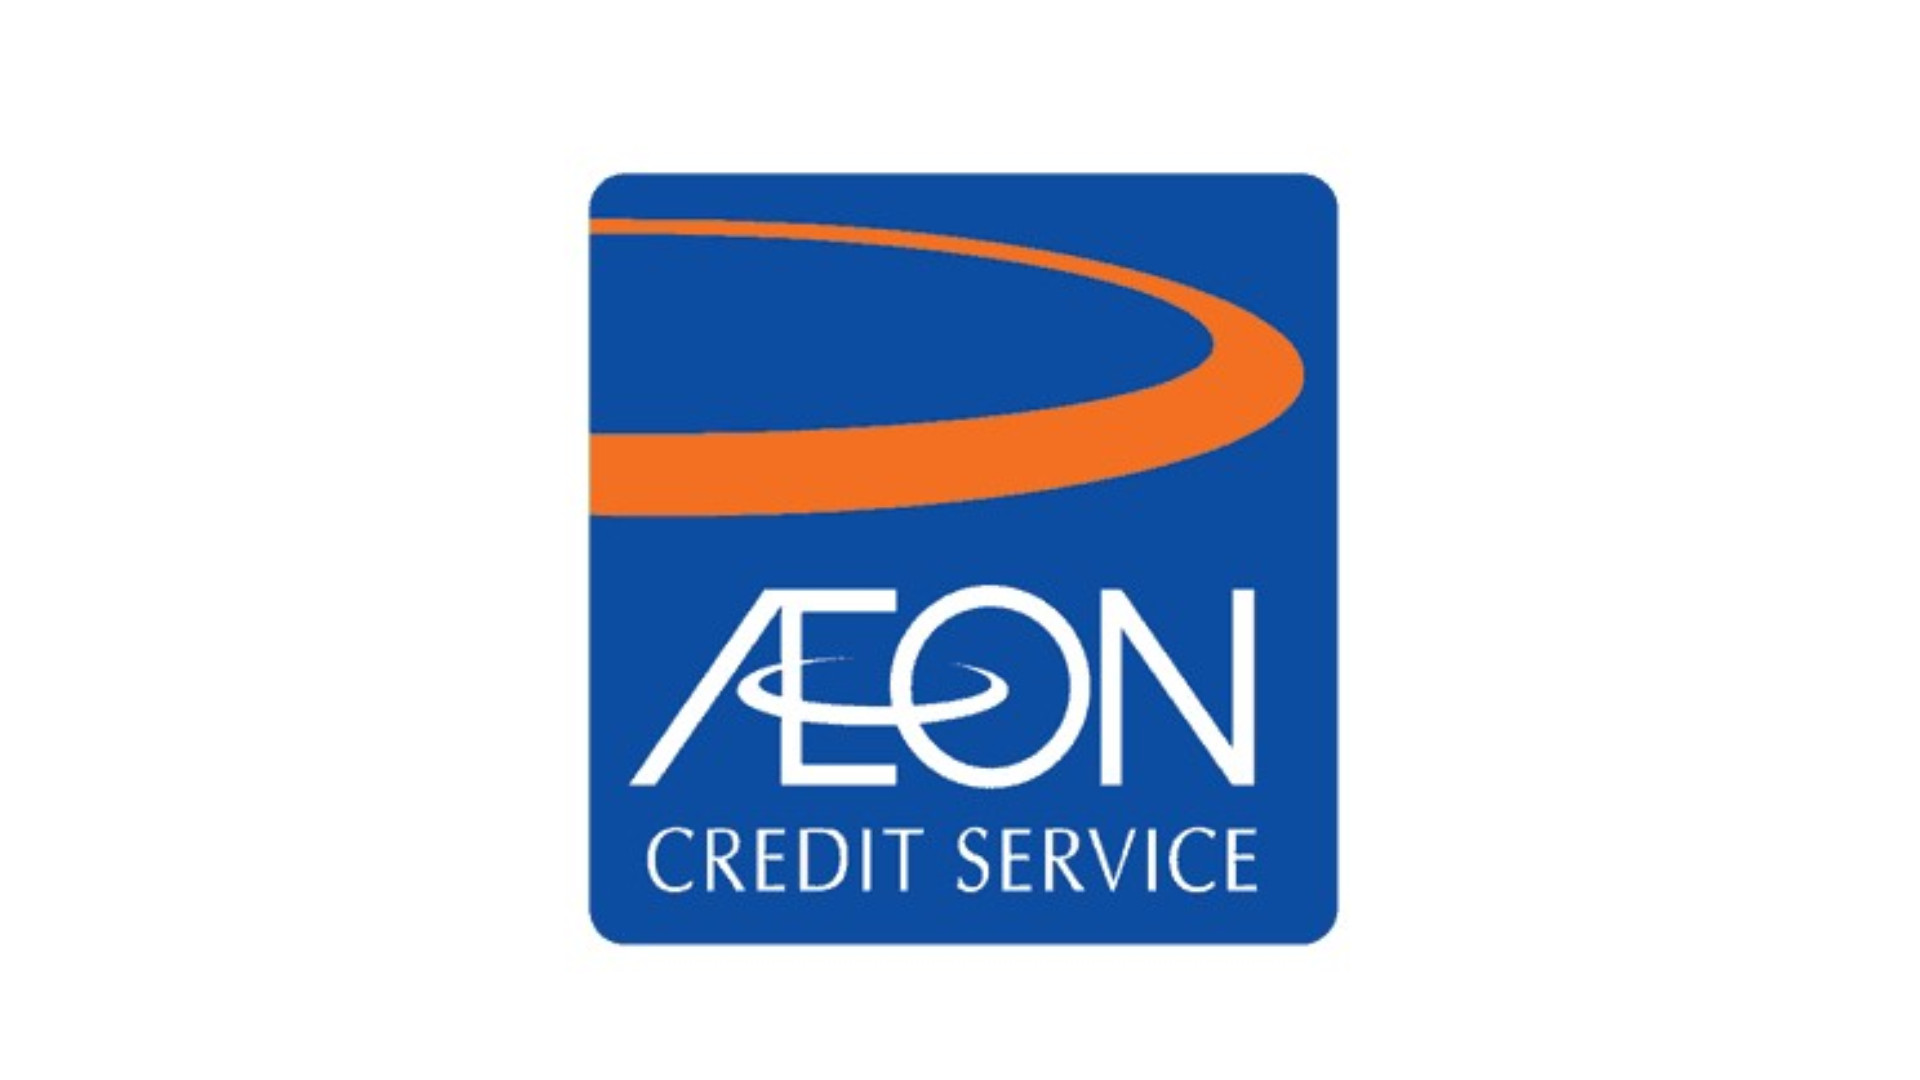 Aeon Credit gives one month deferred loan payment